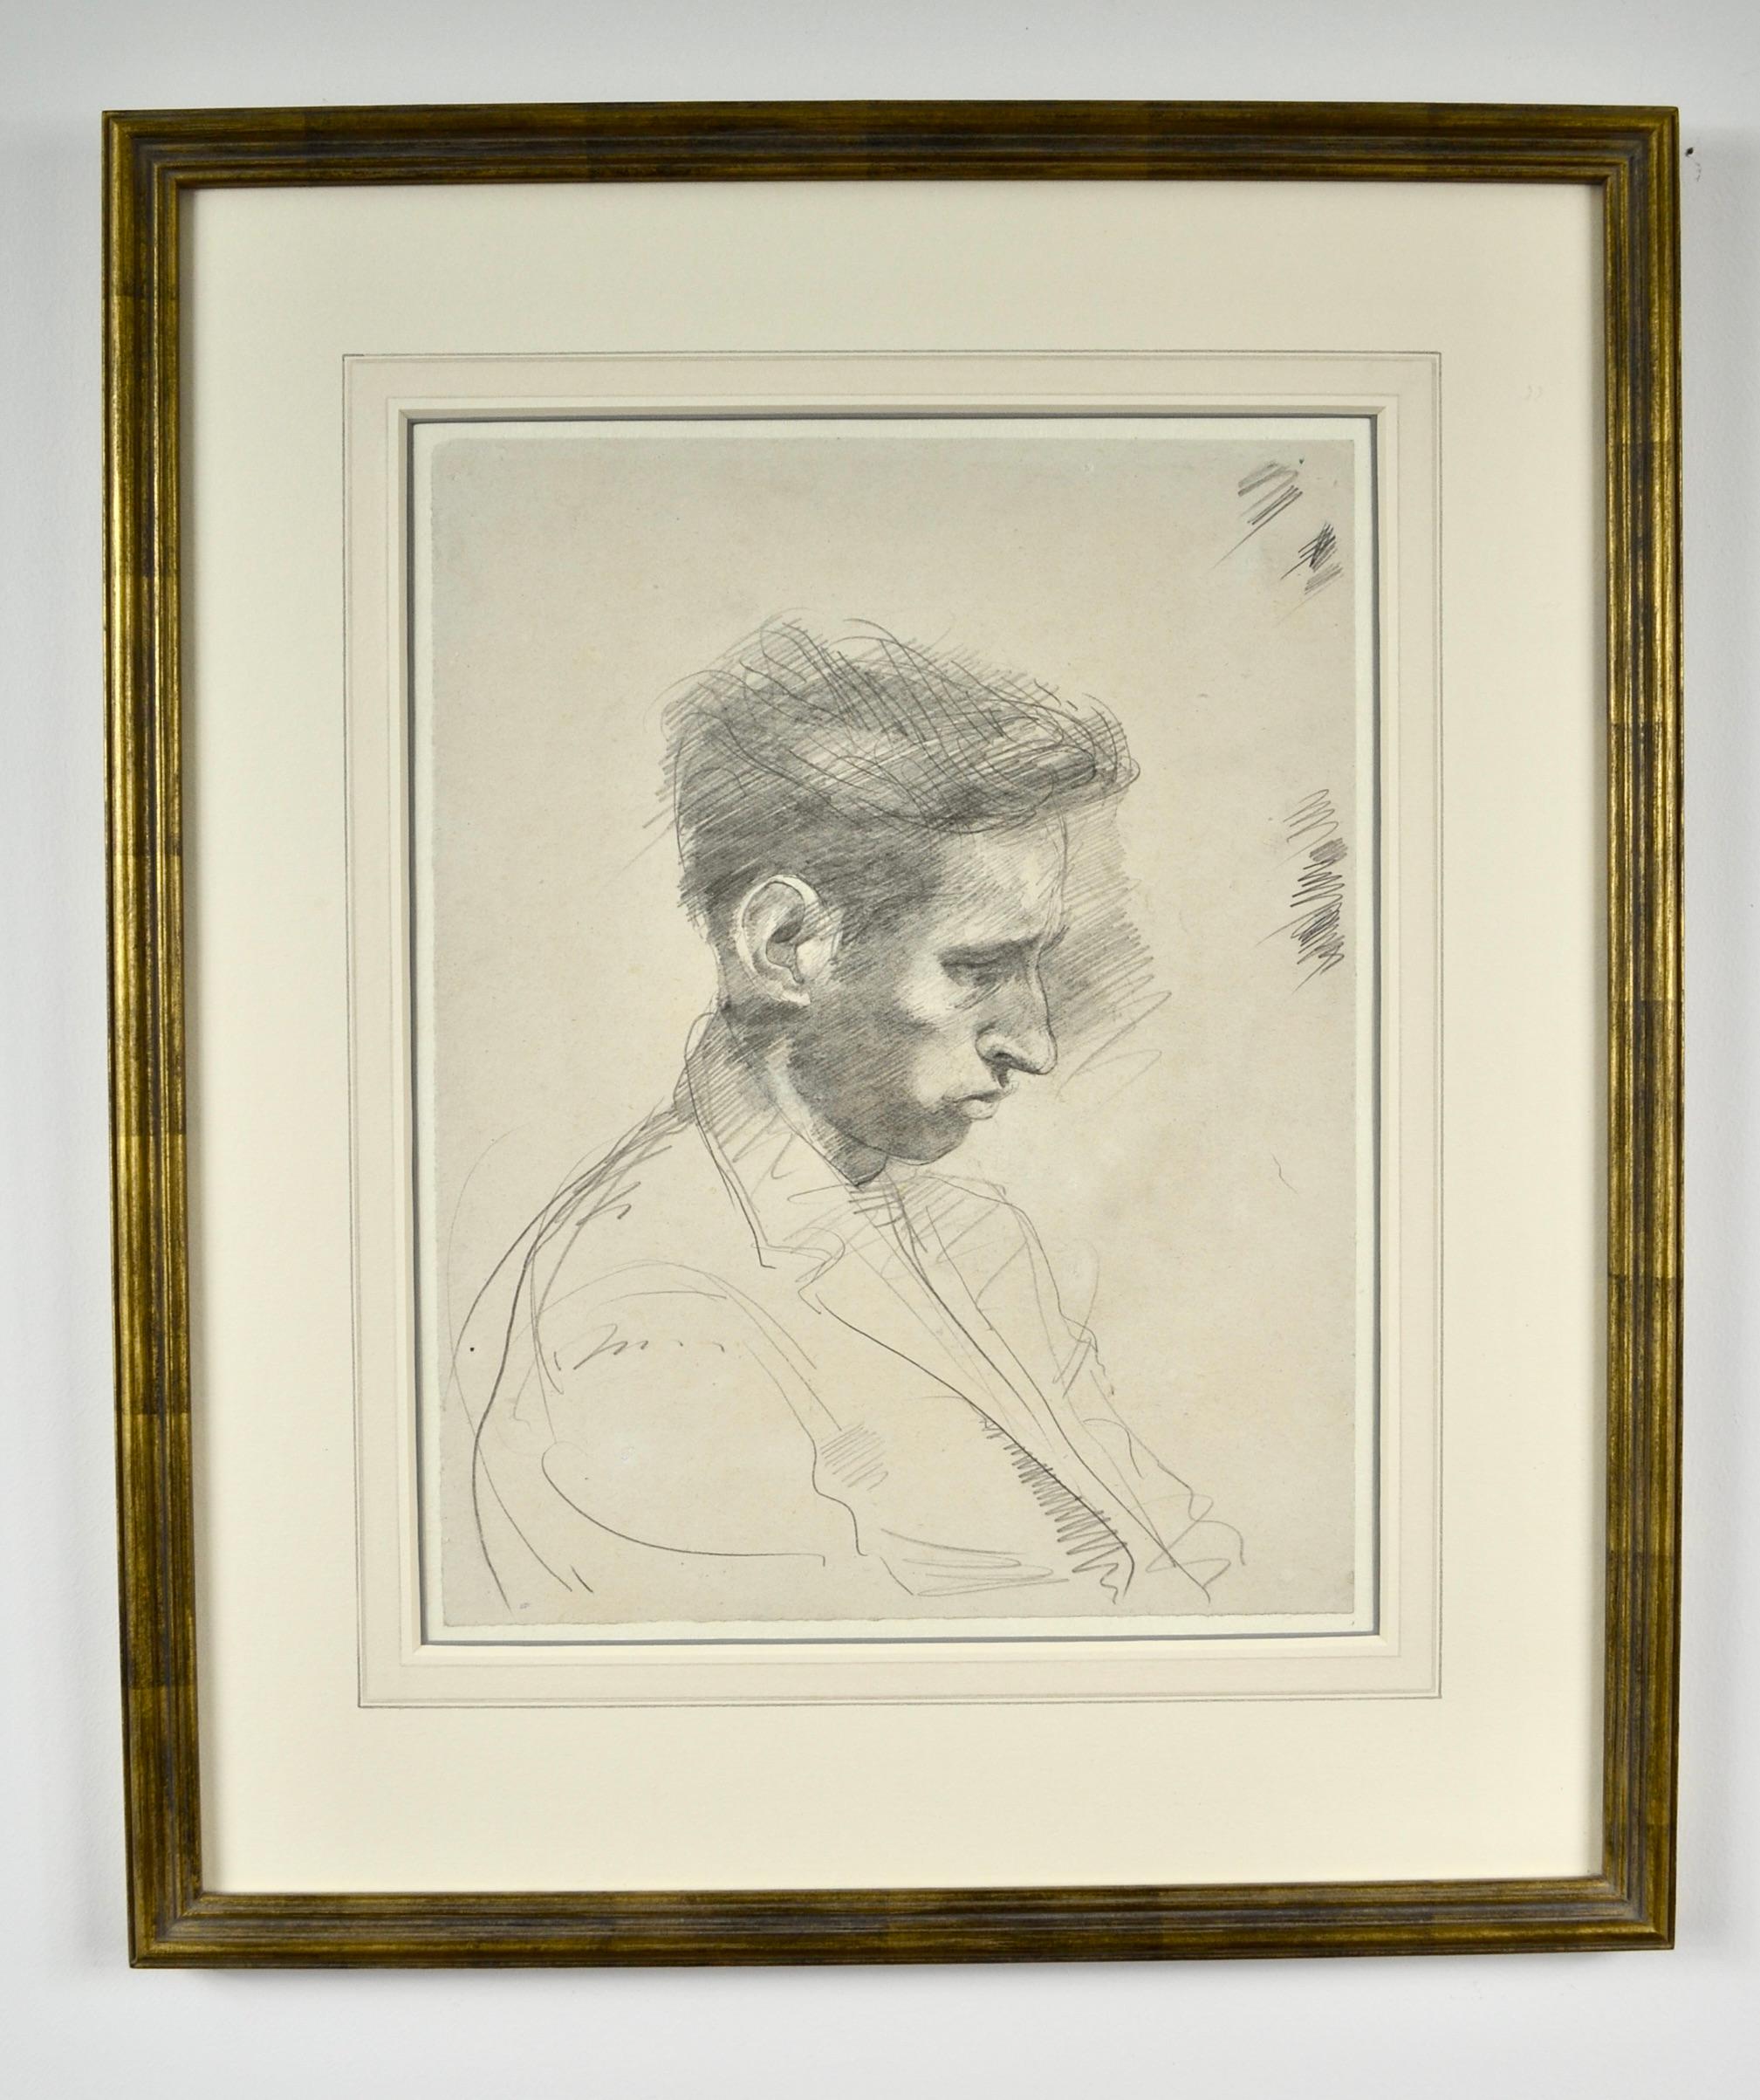 JOHN SERGEANT
(1937-2010)

Head of a Young Man

Pencil

32 by 25 cm., 12 ½ by 10 in.
(frame size 51 by 43 cm., 20 by 17 in.)

Sergeant was born in London, the son of a civil servant.  His family soon moved to Faversham in Kent after they were bombed